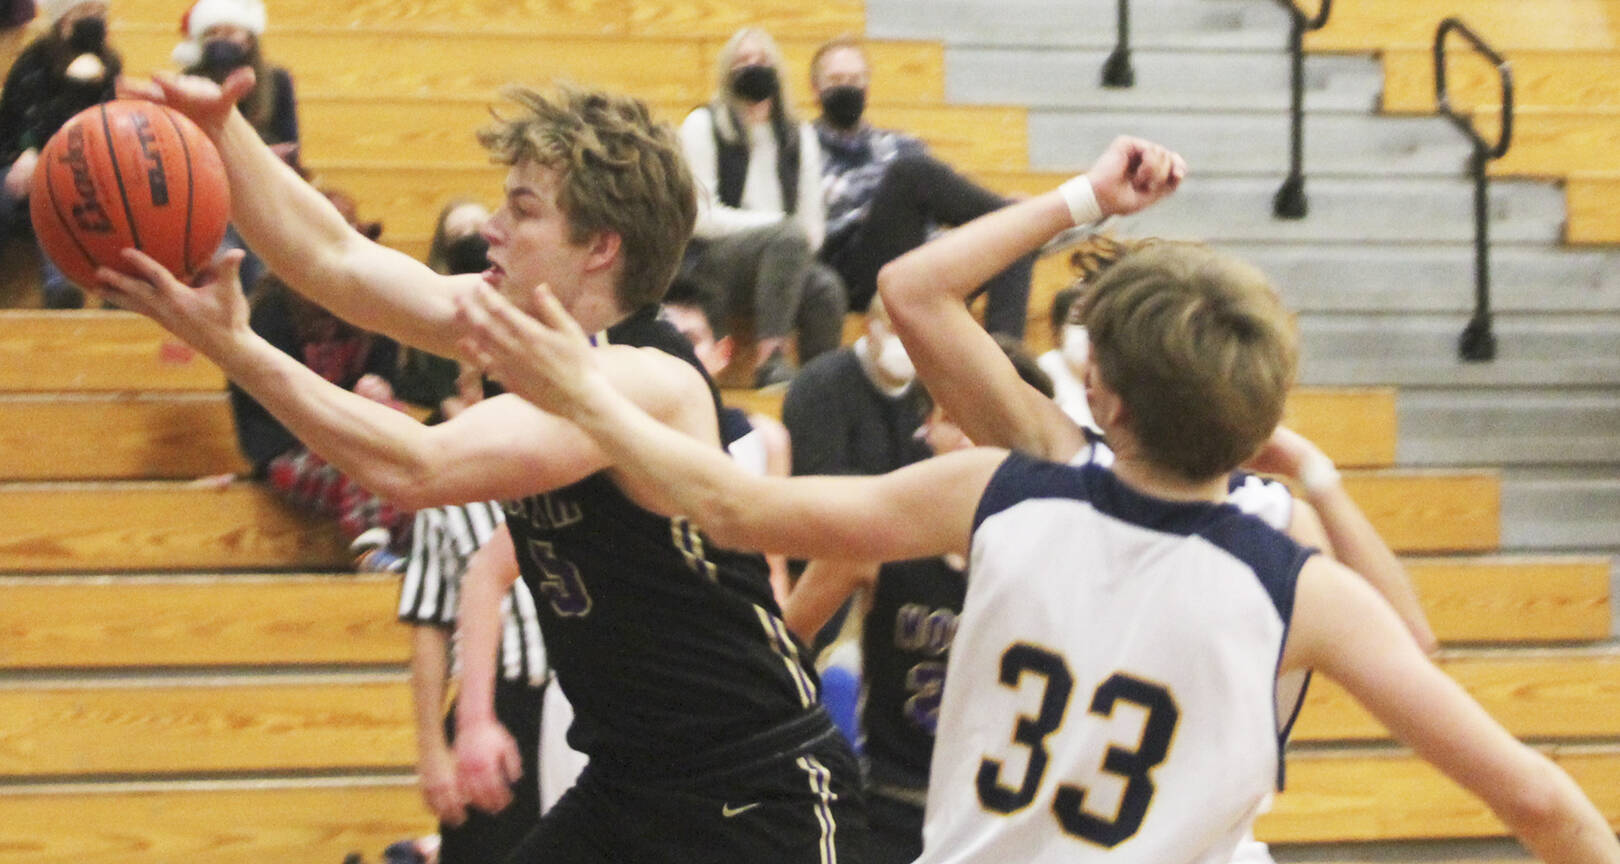 Colton Bower of North Kitsap and Caleb Durrance (33) of BI go after a rebound.